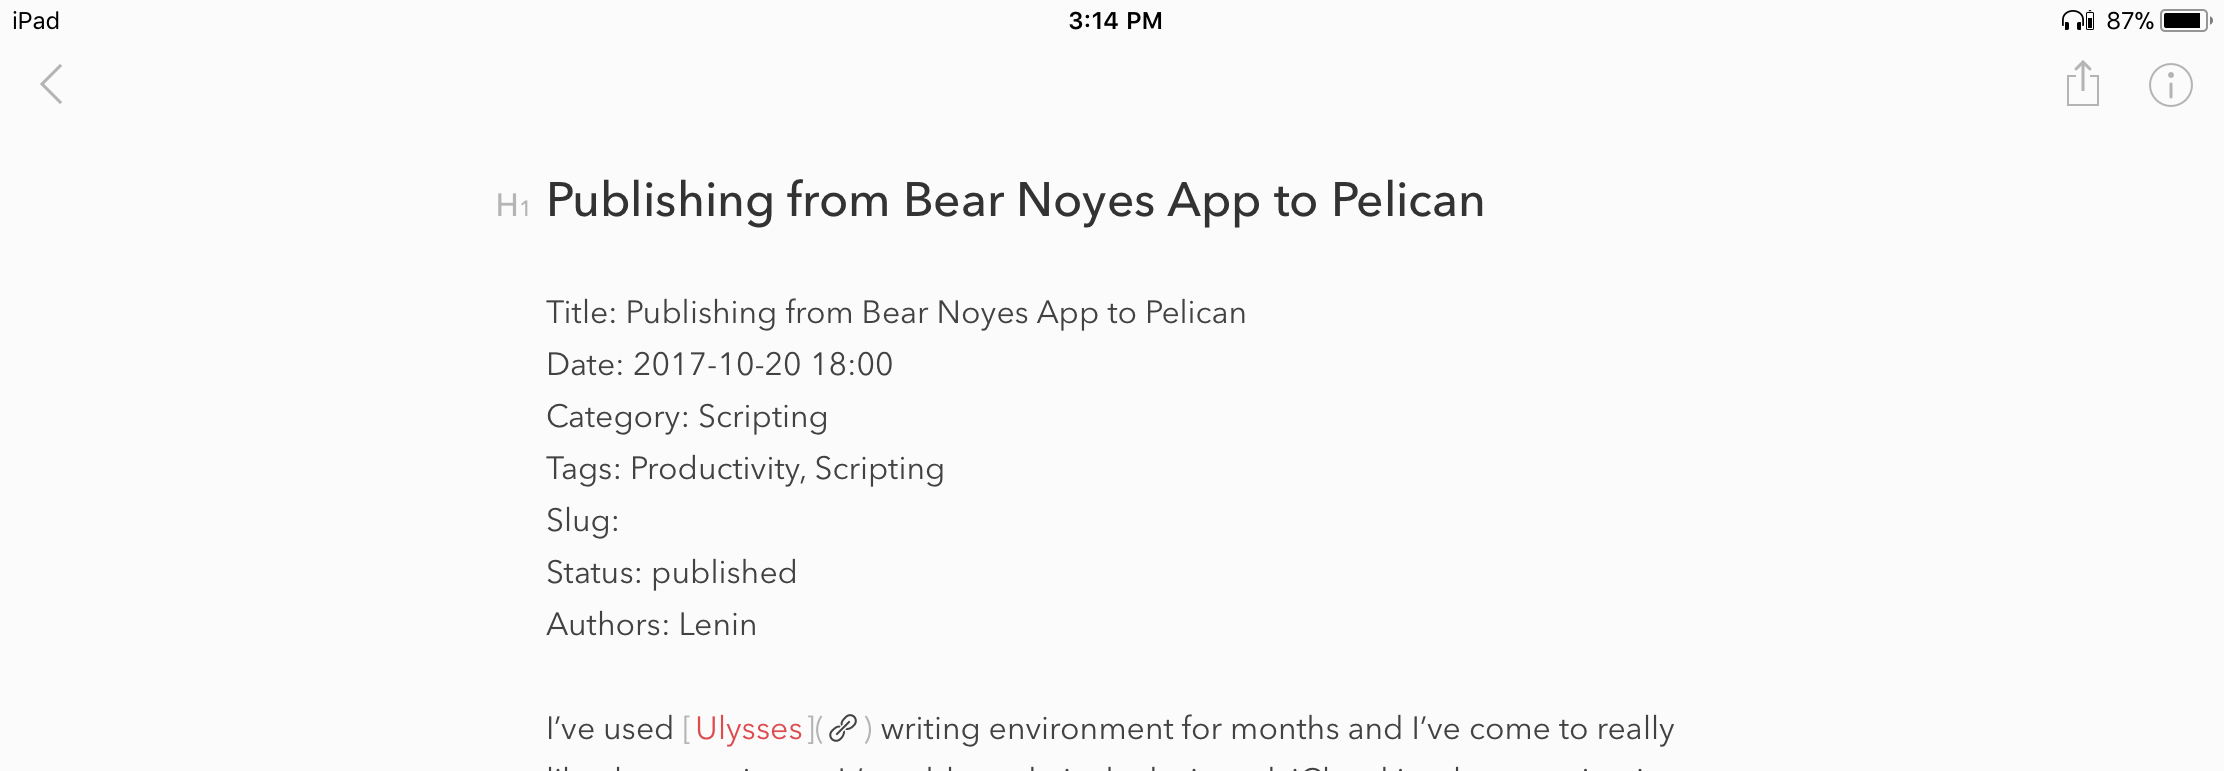 Screenshot from Bear App for iOS. “H1” line is removed by the script.